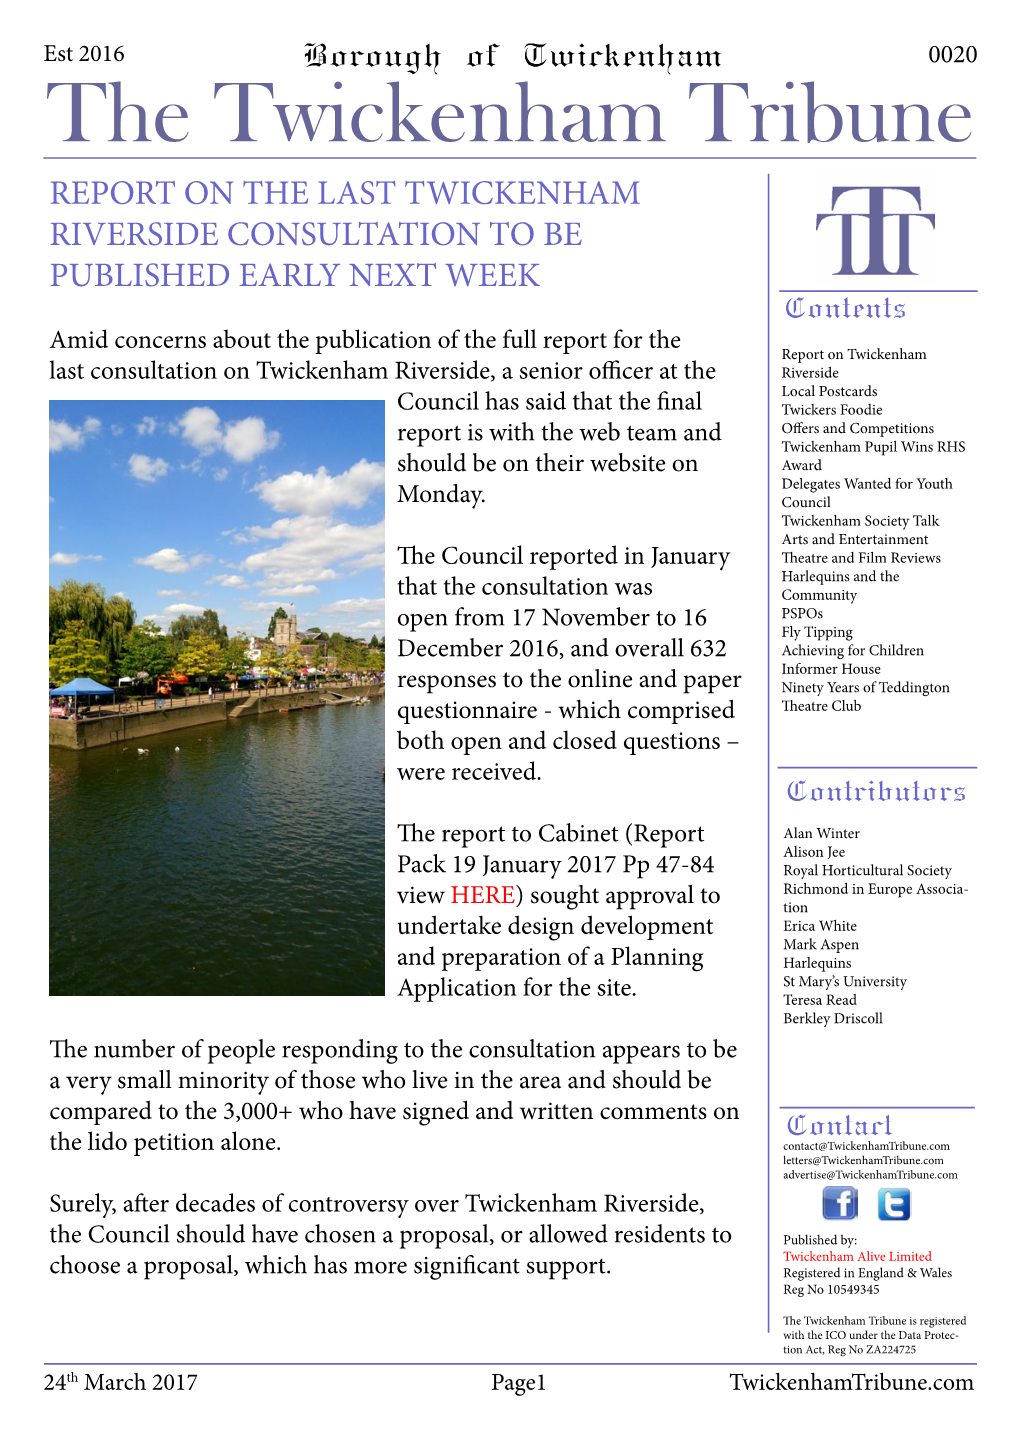 The Twickenham Tribune REPORT on the LAST TWICKENHAM RIVERSIDE CONSULTATION to BE PUBLISHED EARLY NEXT WEEK Contents